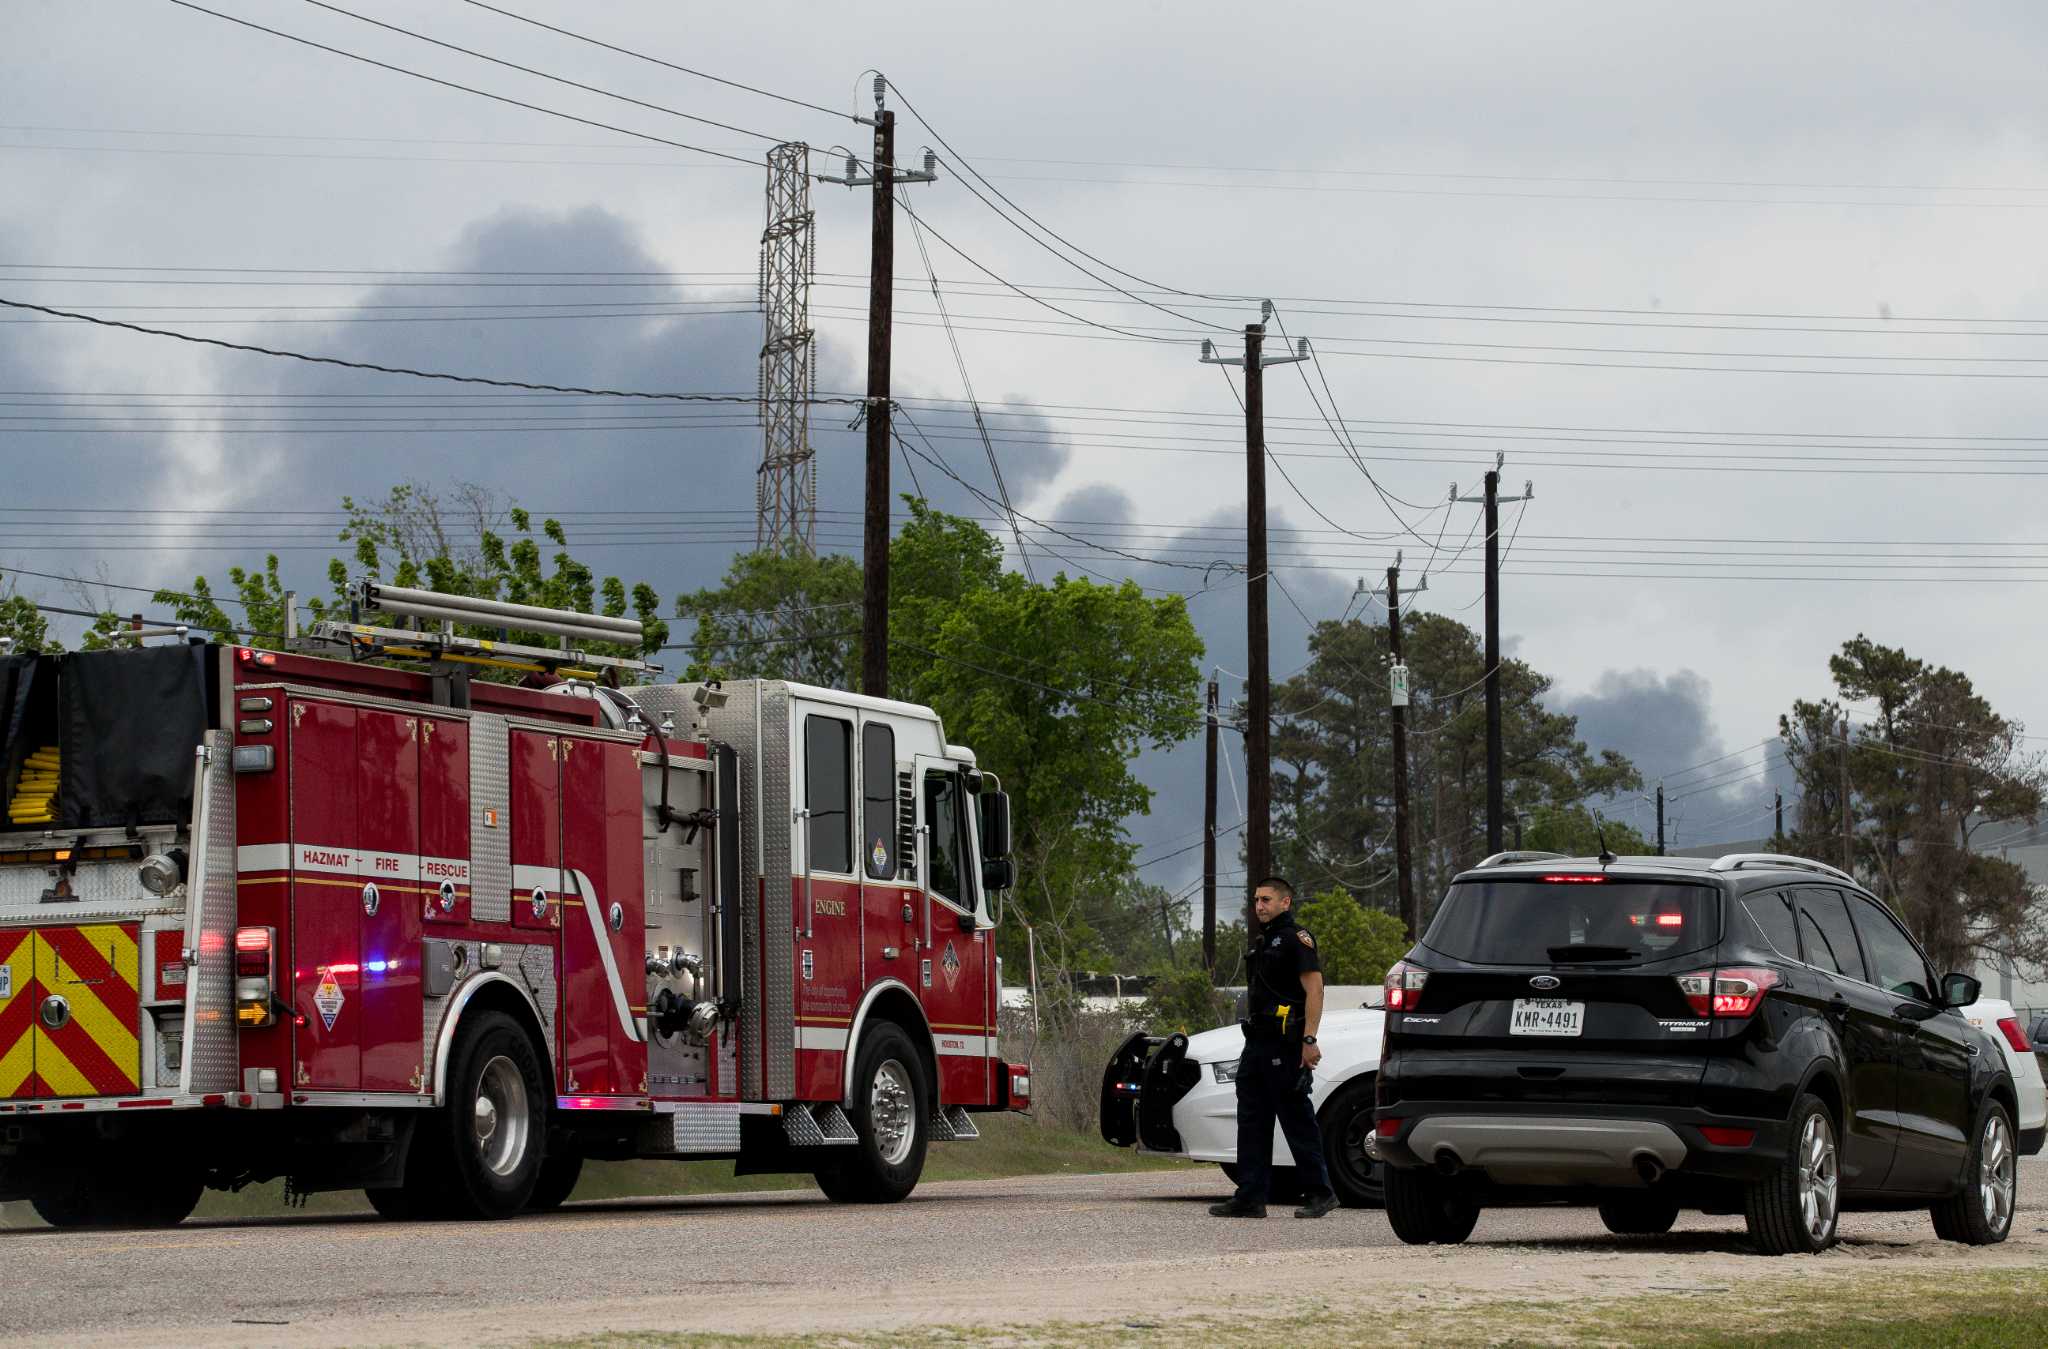 Channelview industrial fire, seen miles away, causes massive emergency response